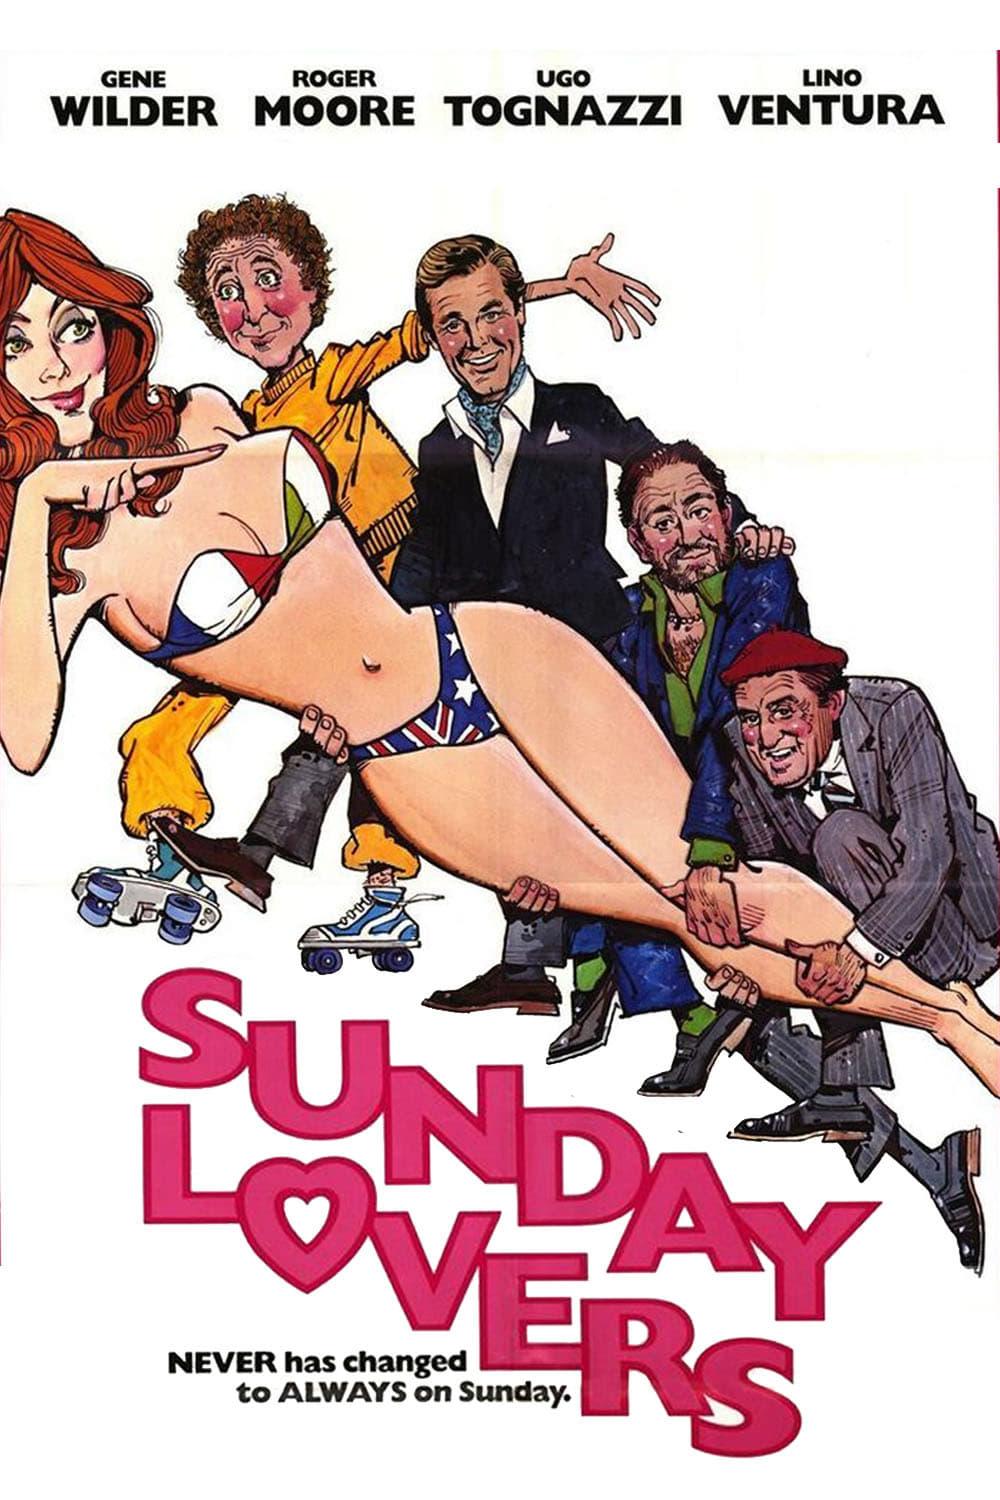 Sunday Lovers poster